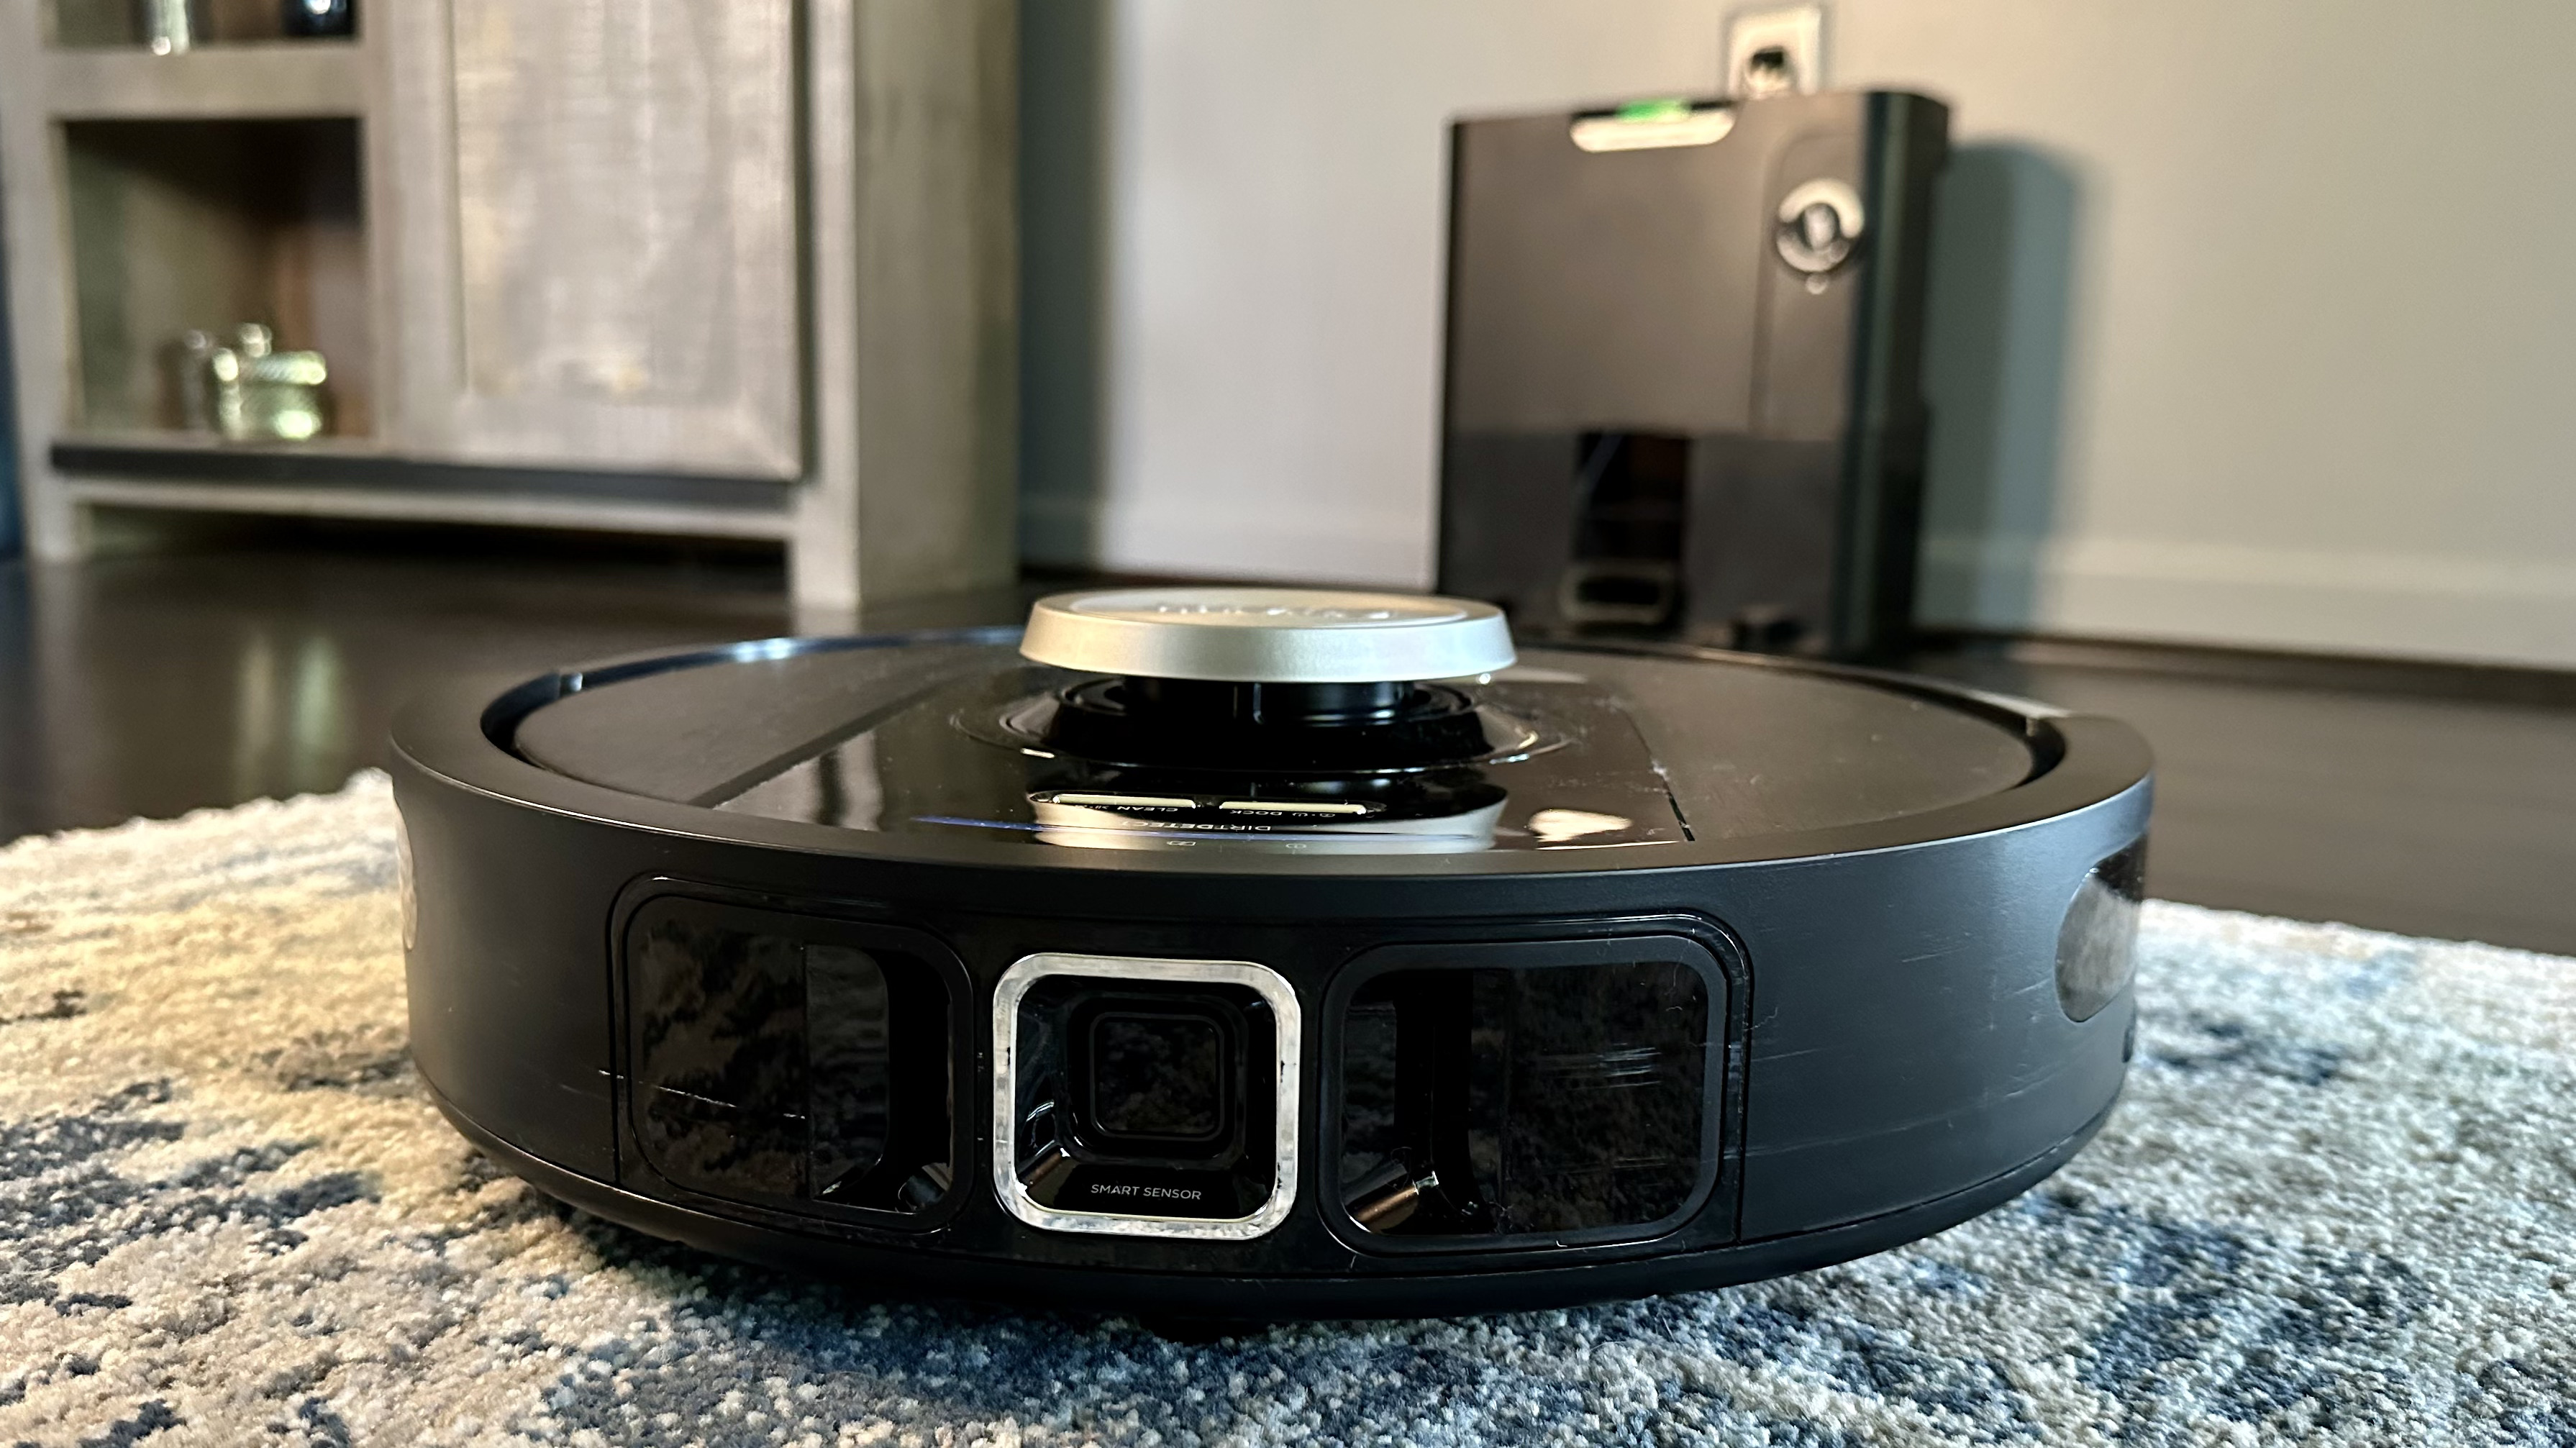 Narwal Freo Is an Obsessively Clean Smart Robot Vacuum